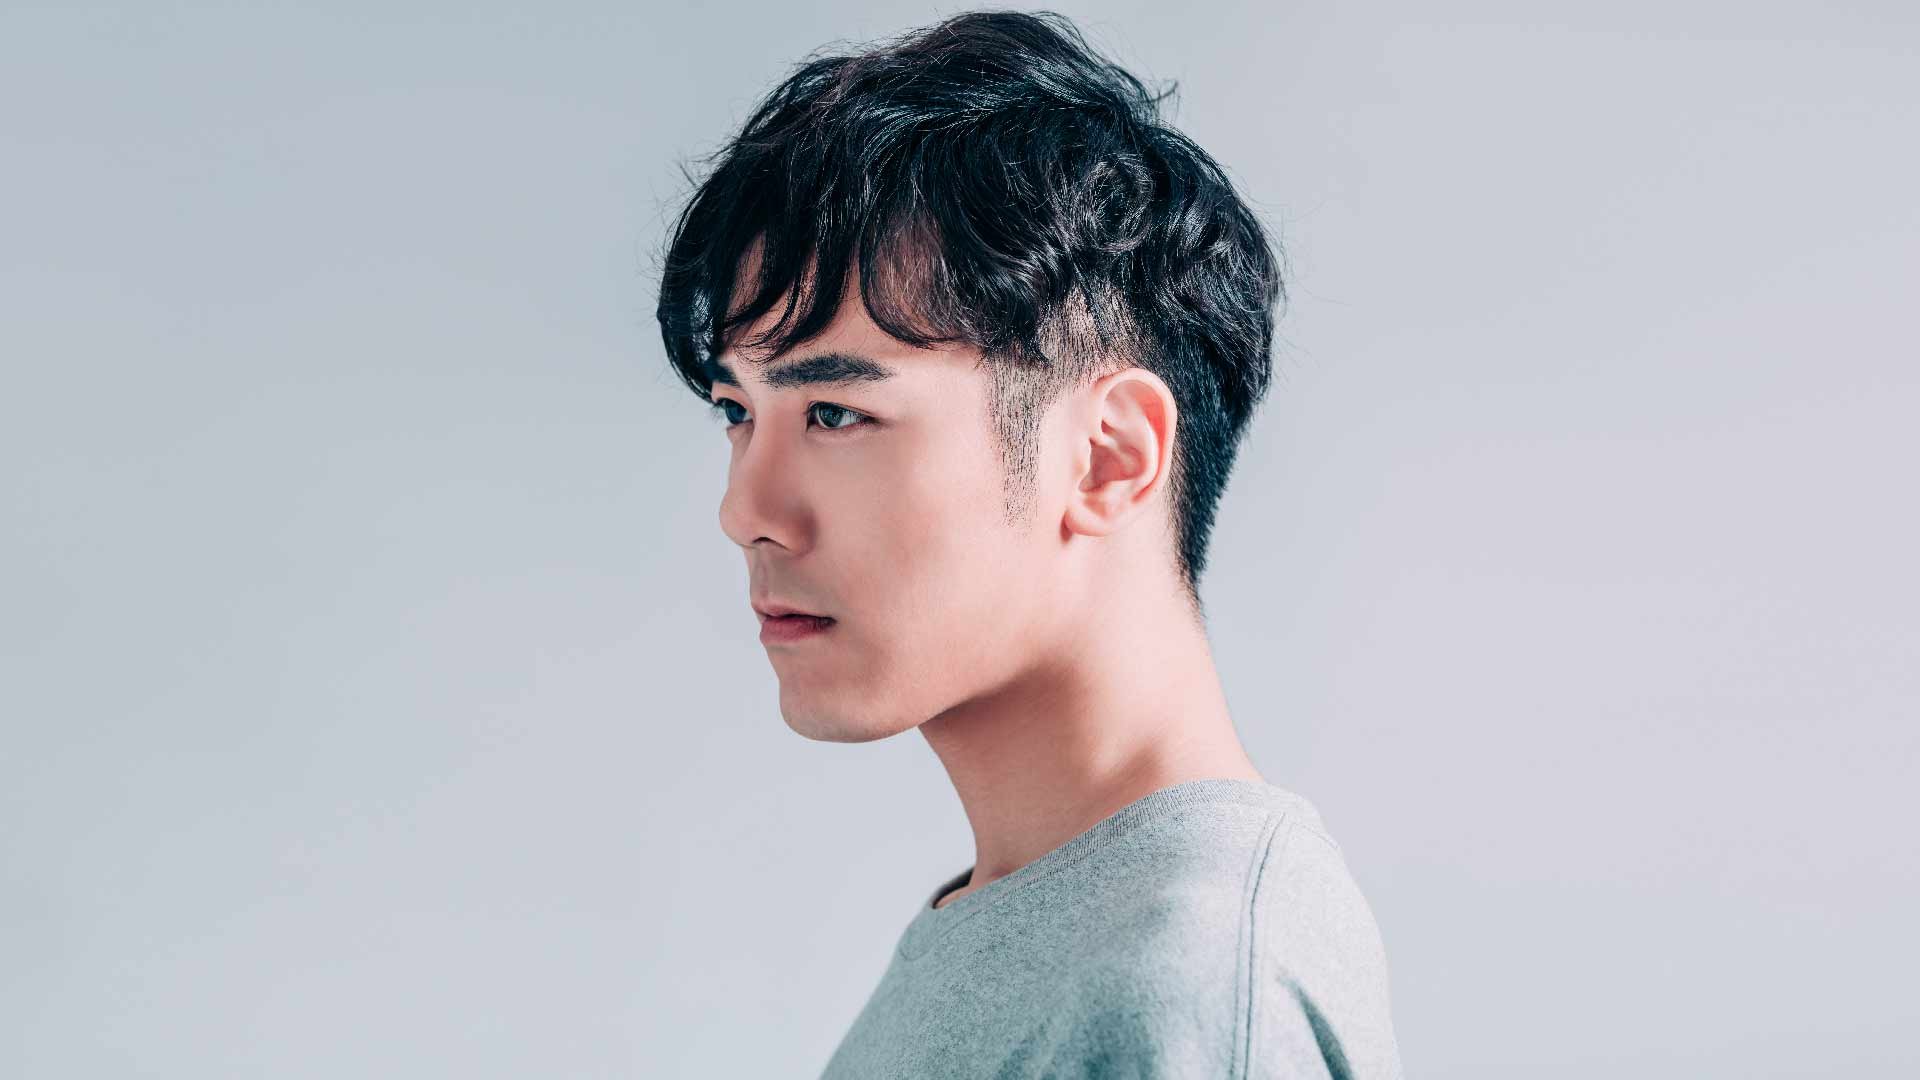 13 Korean Male Hairstyles To Impress Your Girlfriend Or Crush